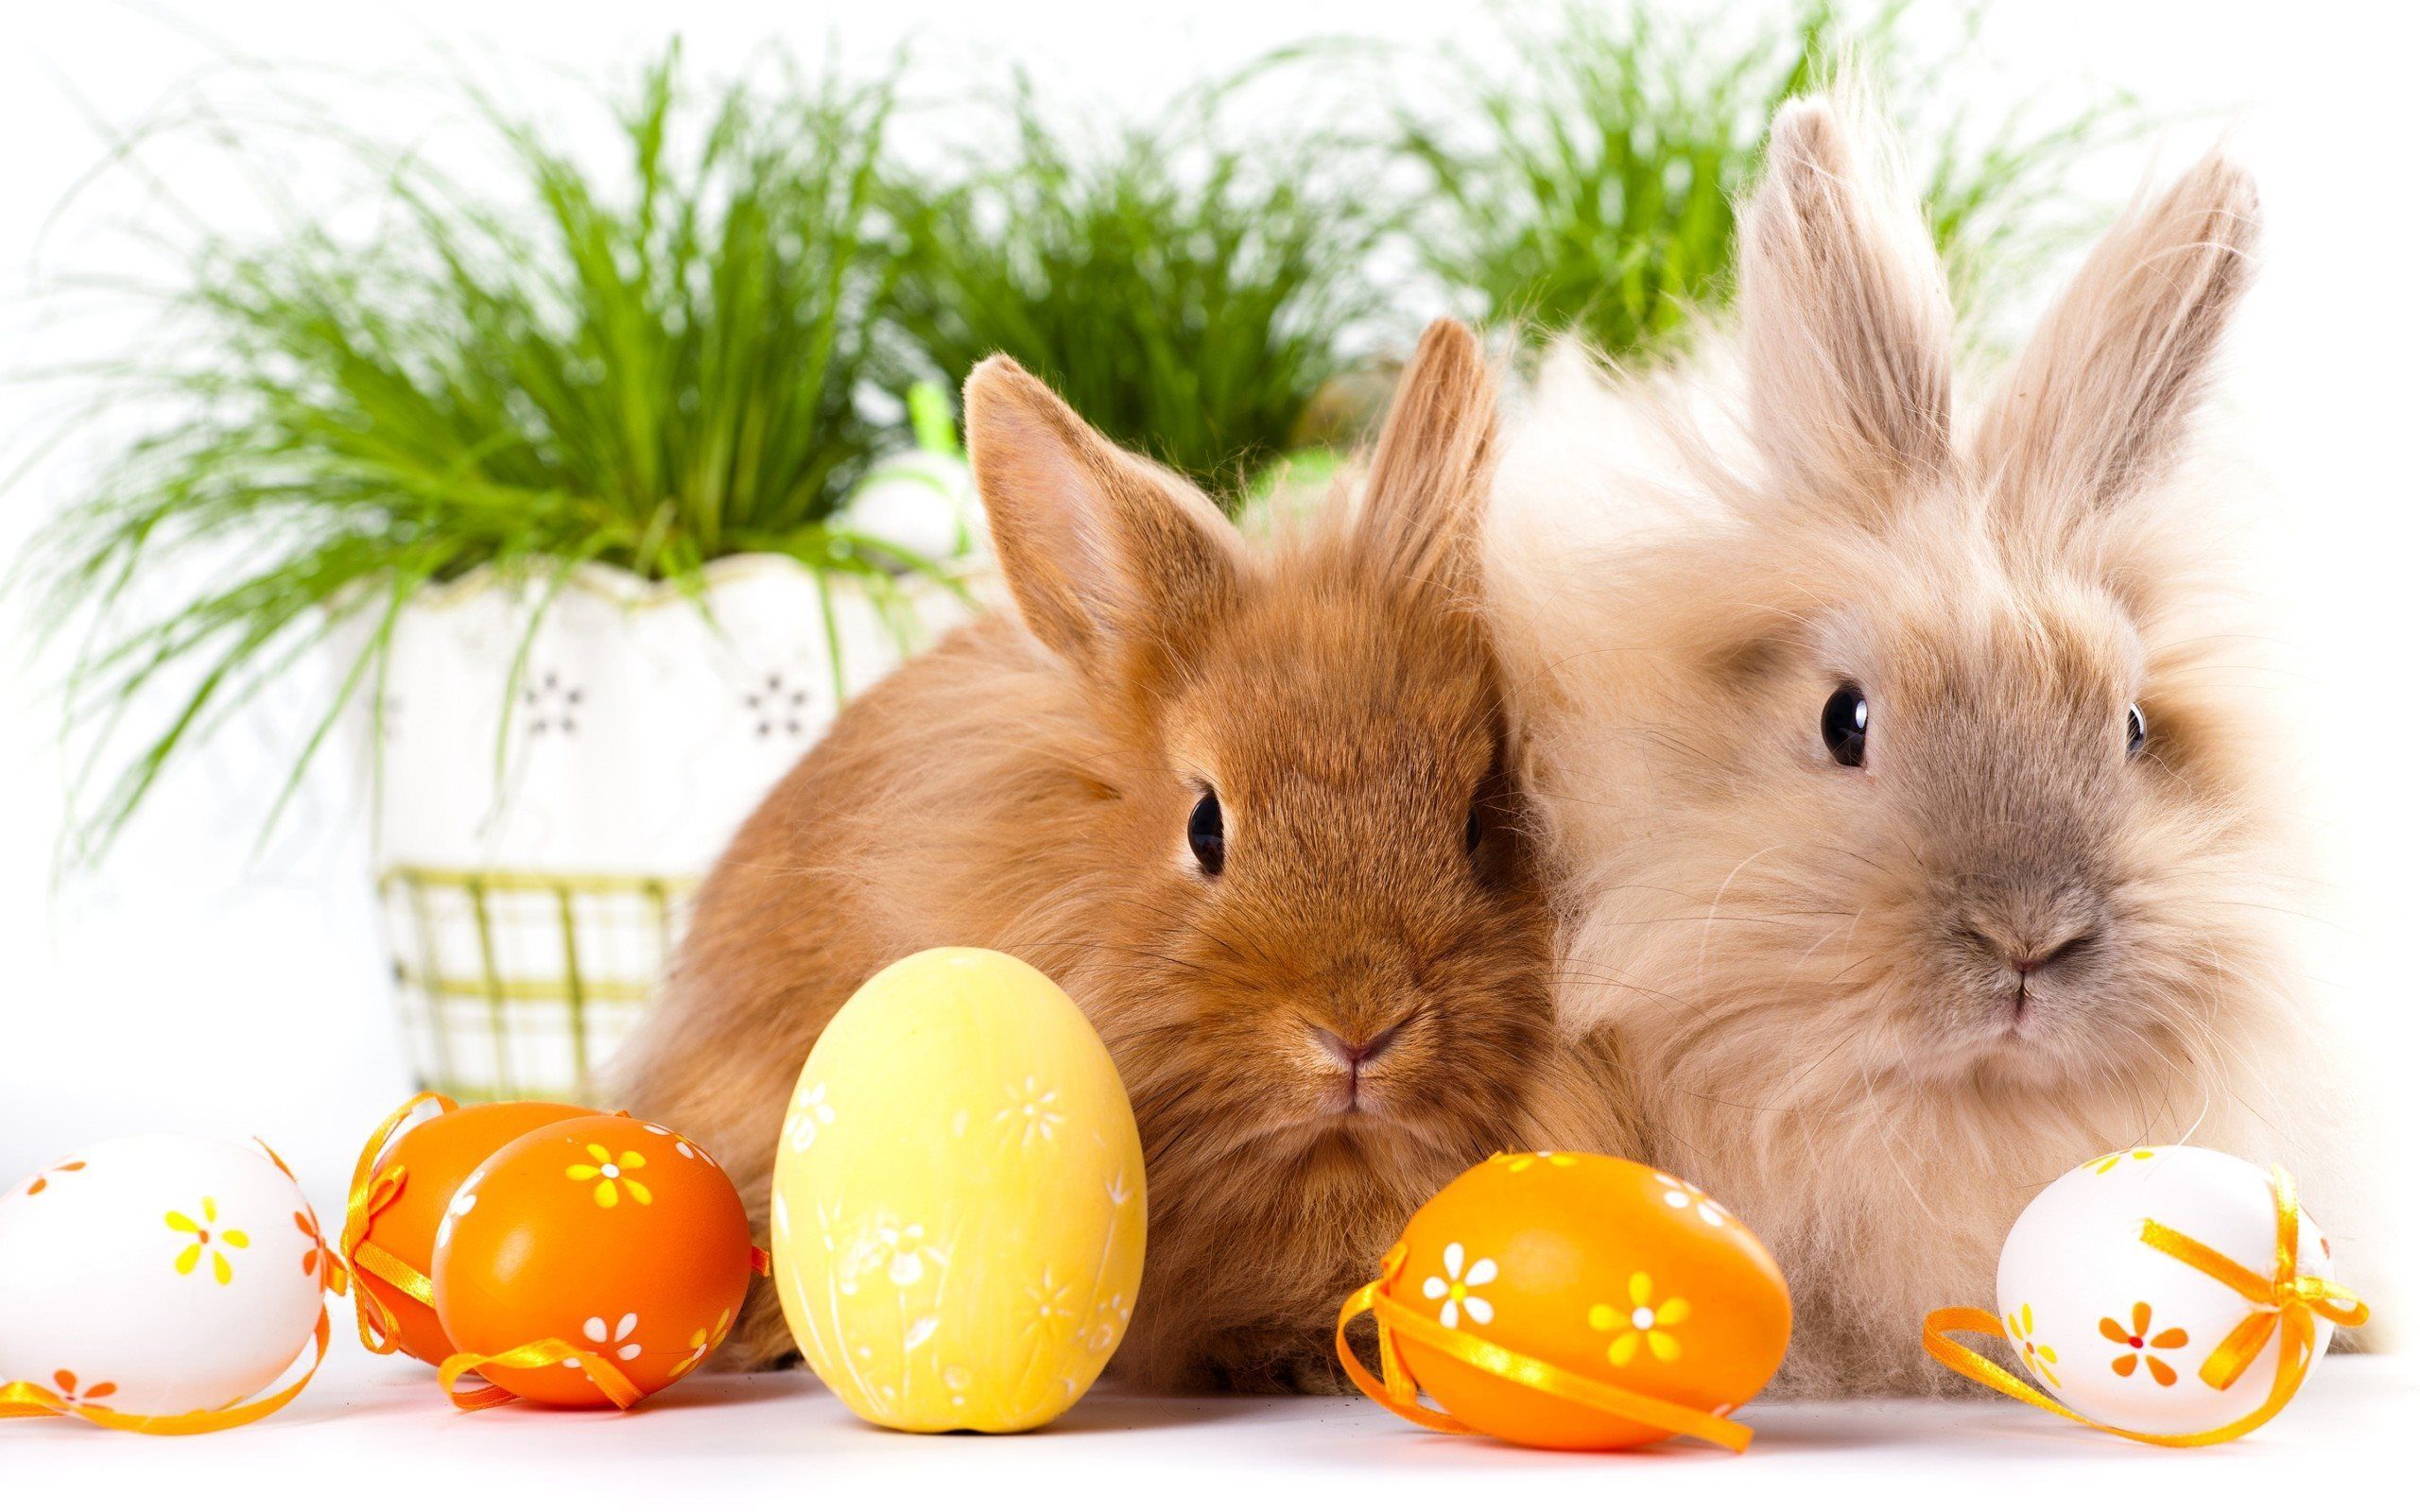 Download wallpaper rabbits, easter eggs, cute animals, easter